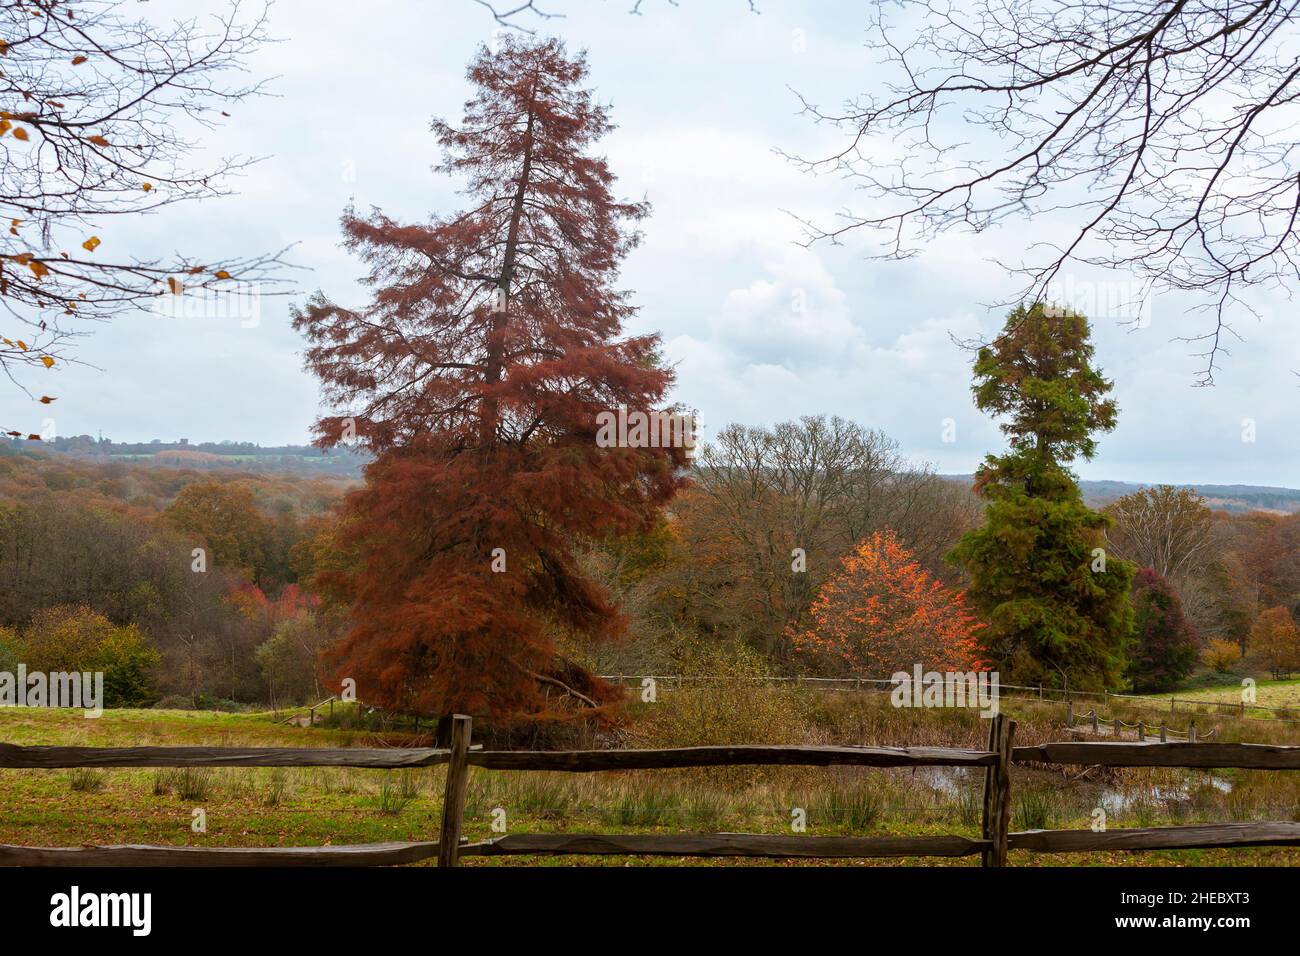 Autumn colour in the High Weald from the garden at Nymans, Handcross, West Sussex, UK Stock Photo